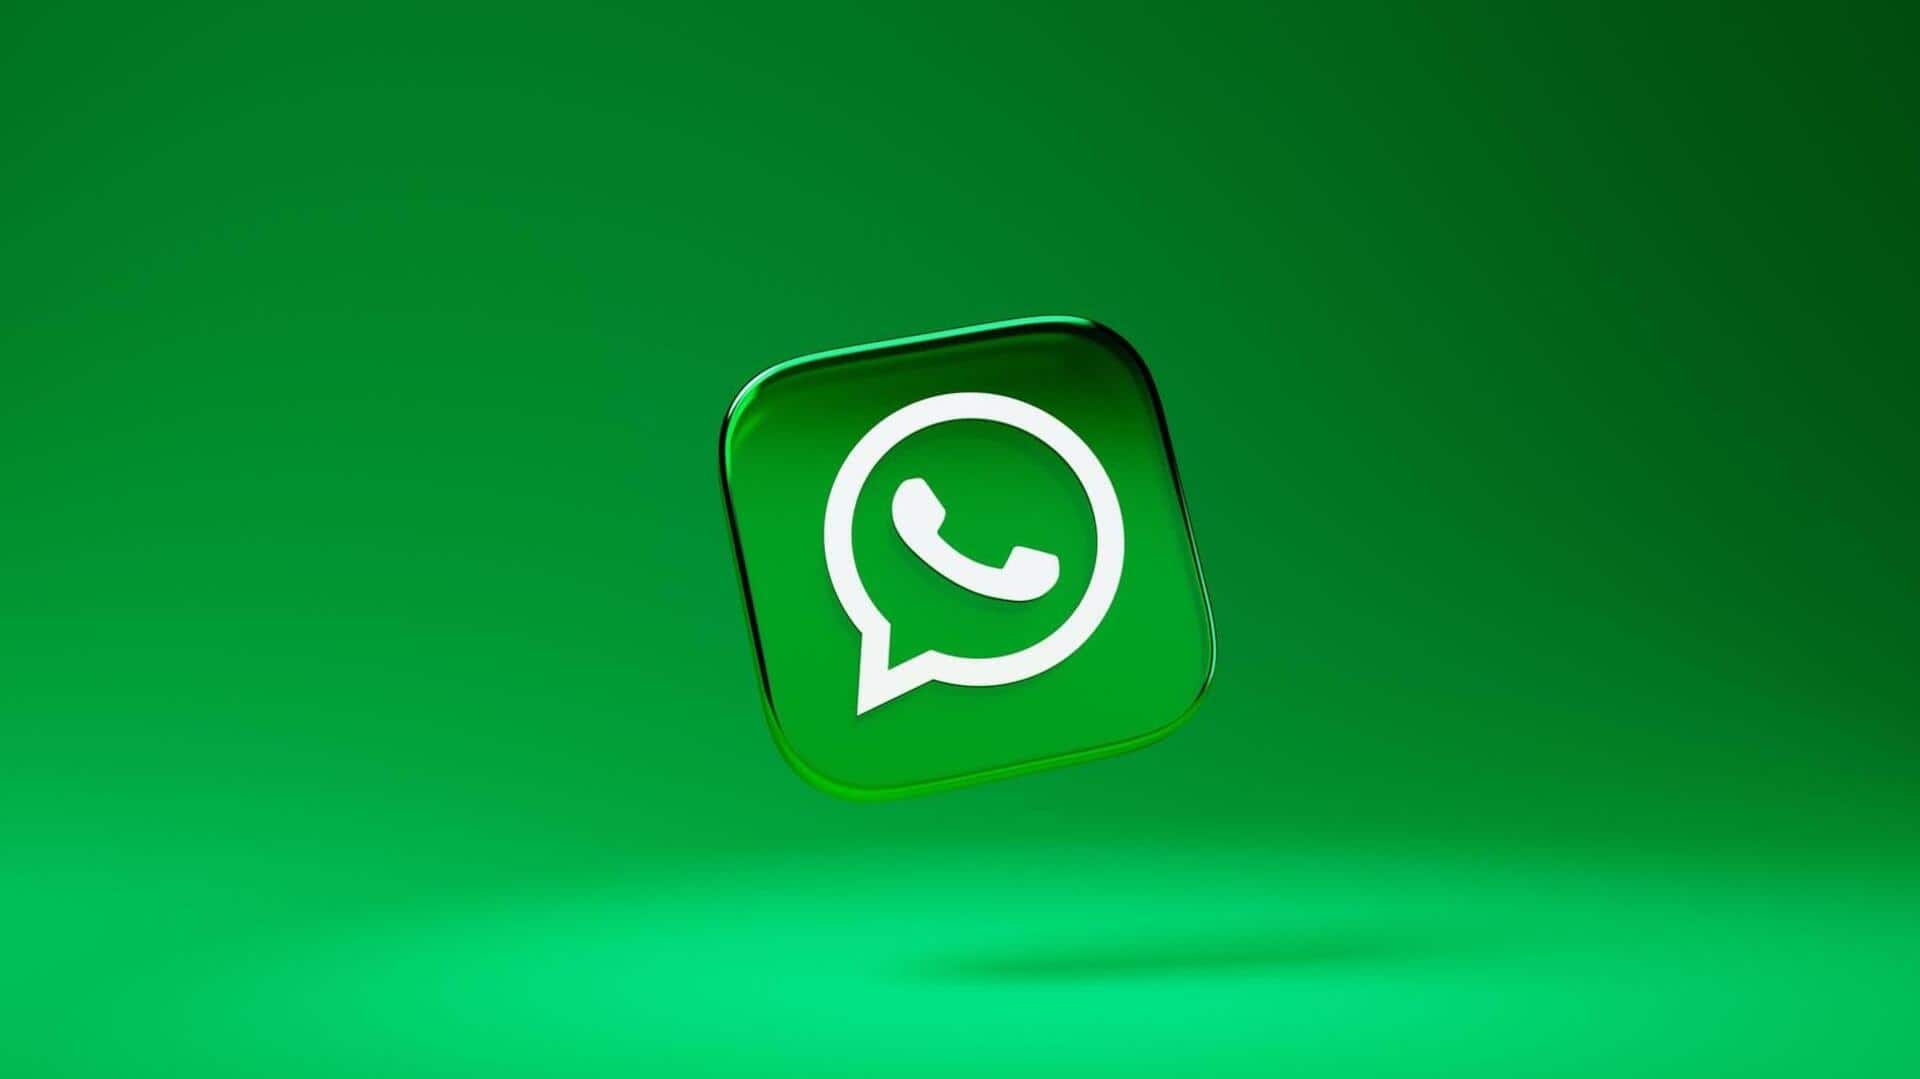 WhatsApp is working on cross-platform messaging: What it means